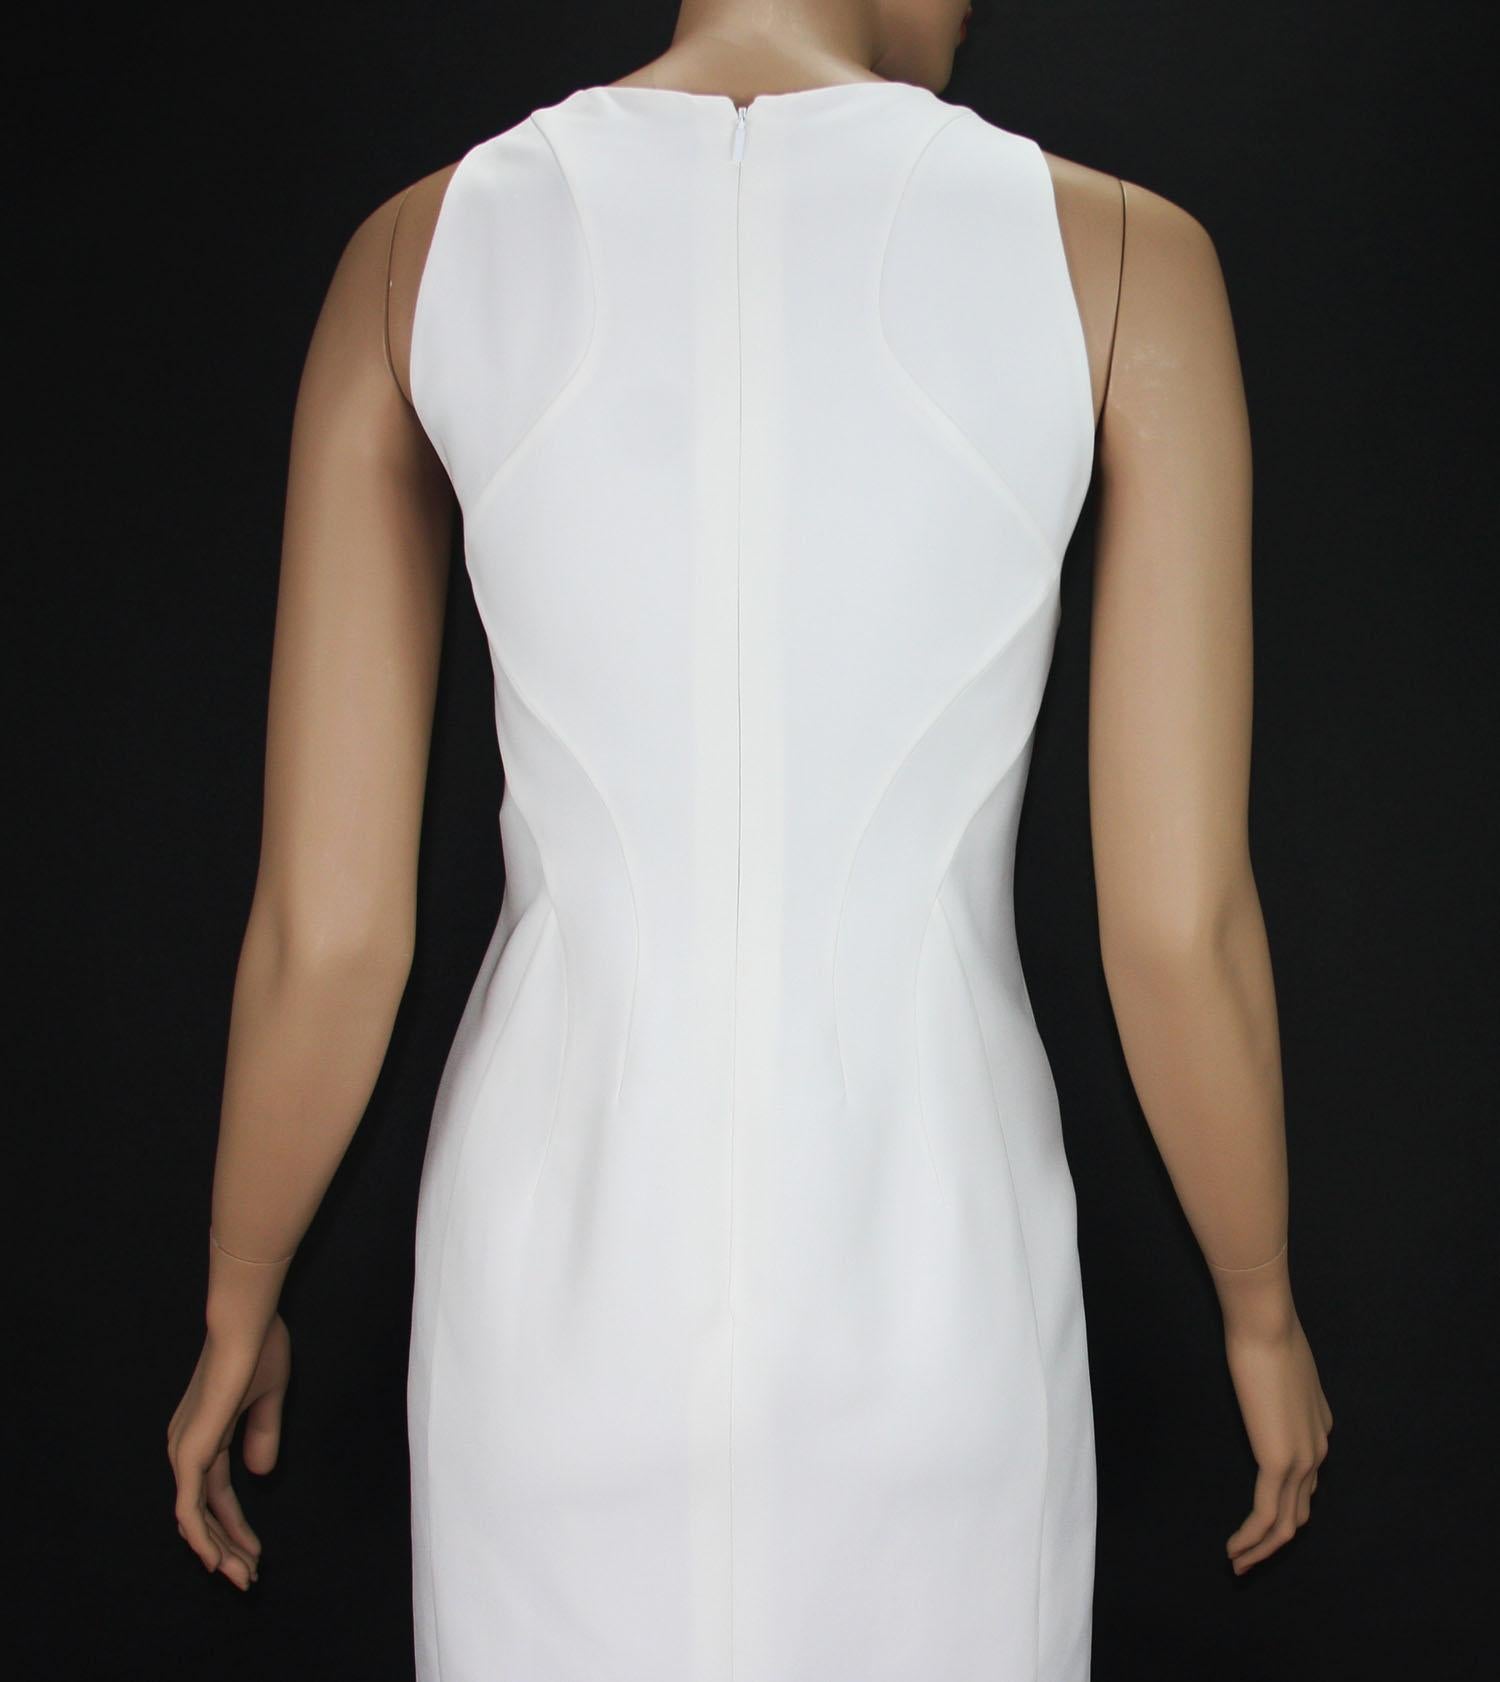 New Versace White Silk Cocktail Dress with Swarovski Crystals It 40 -US 6 In New Condition For Sale In Montgomery, TX